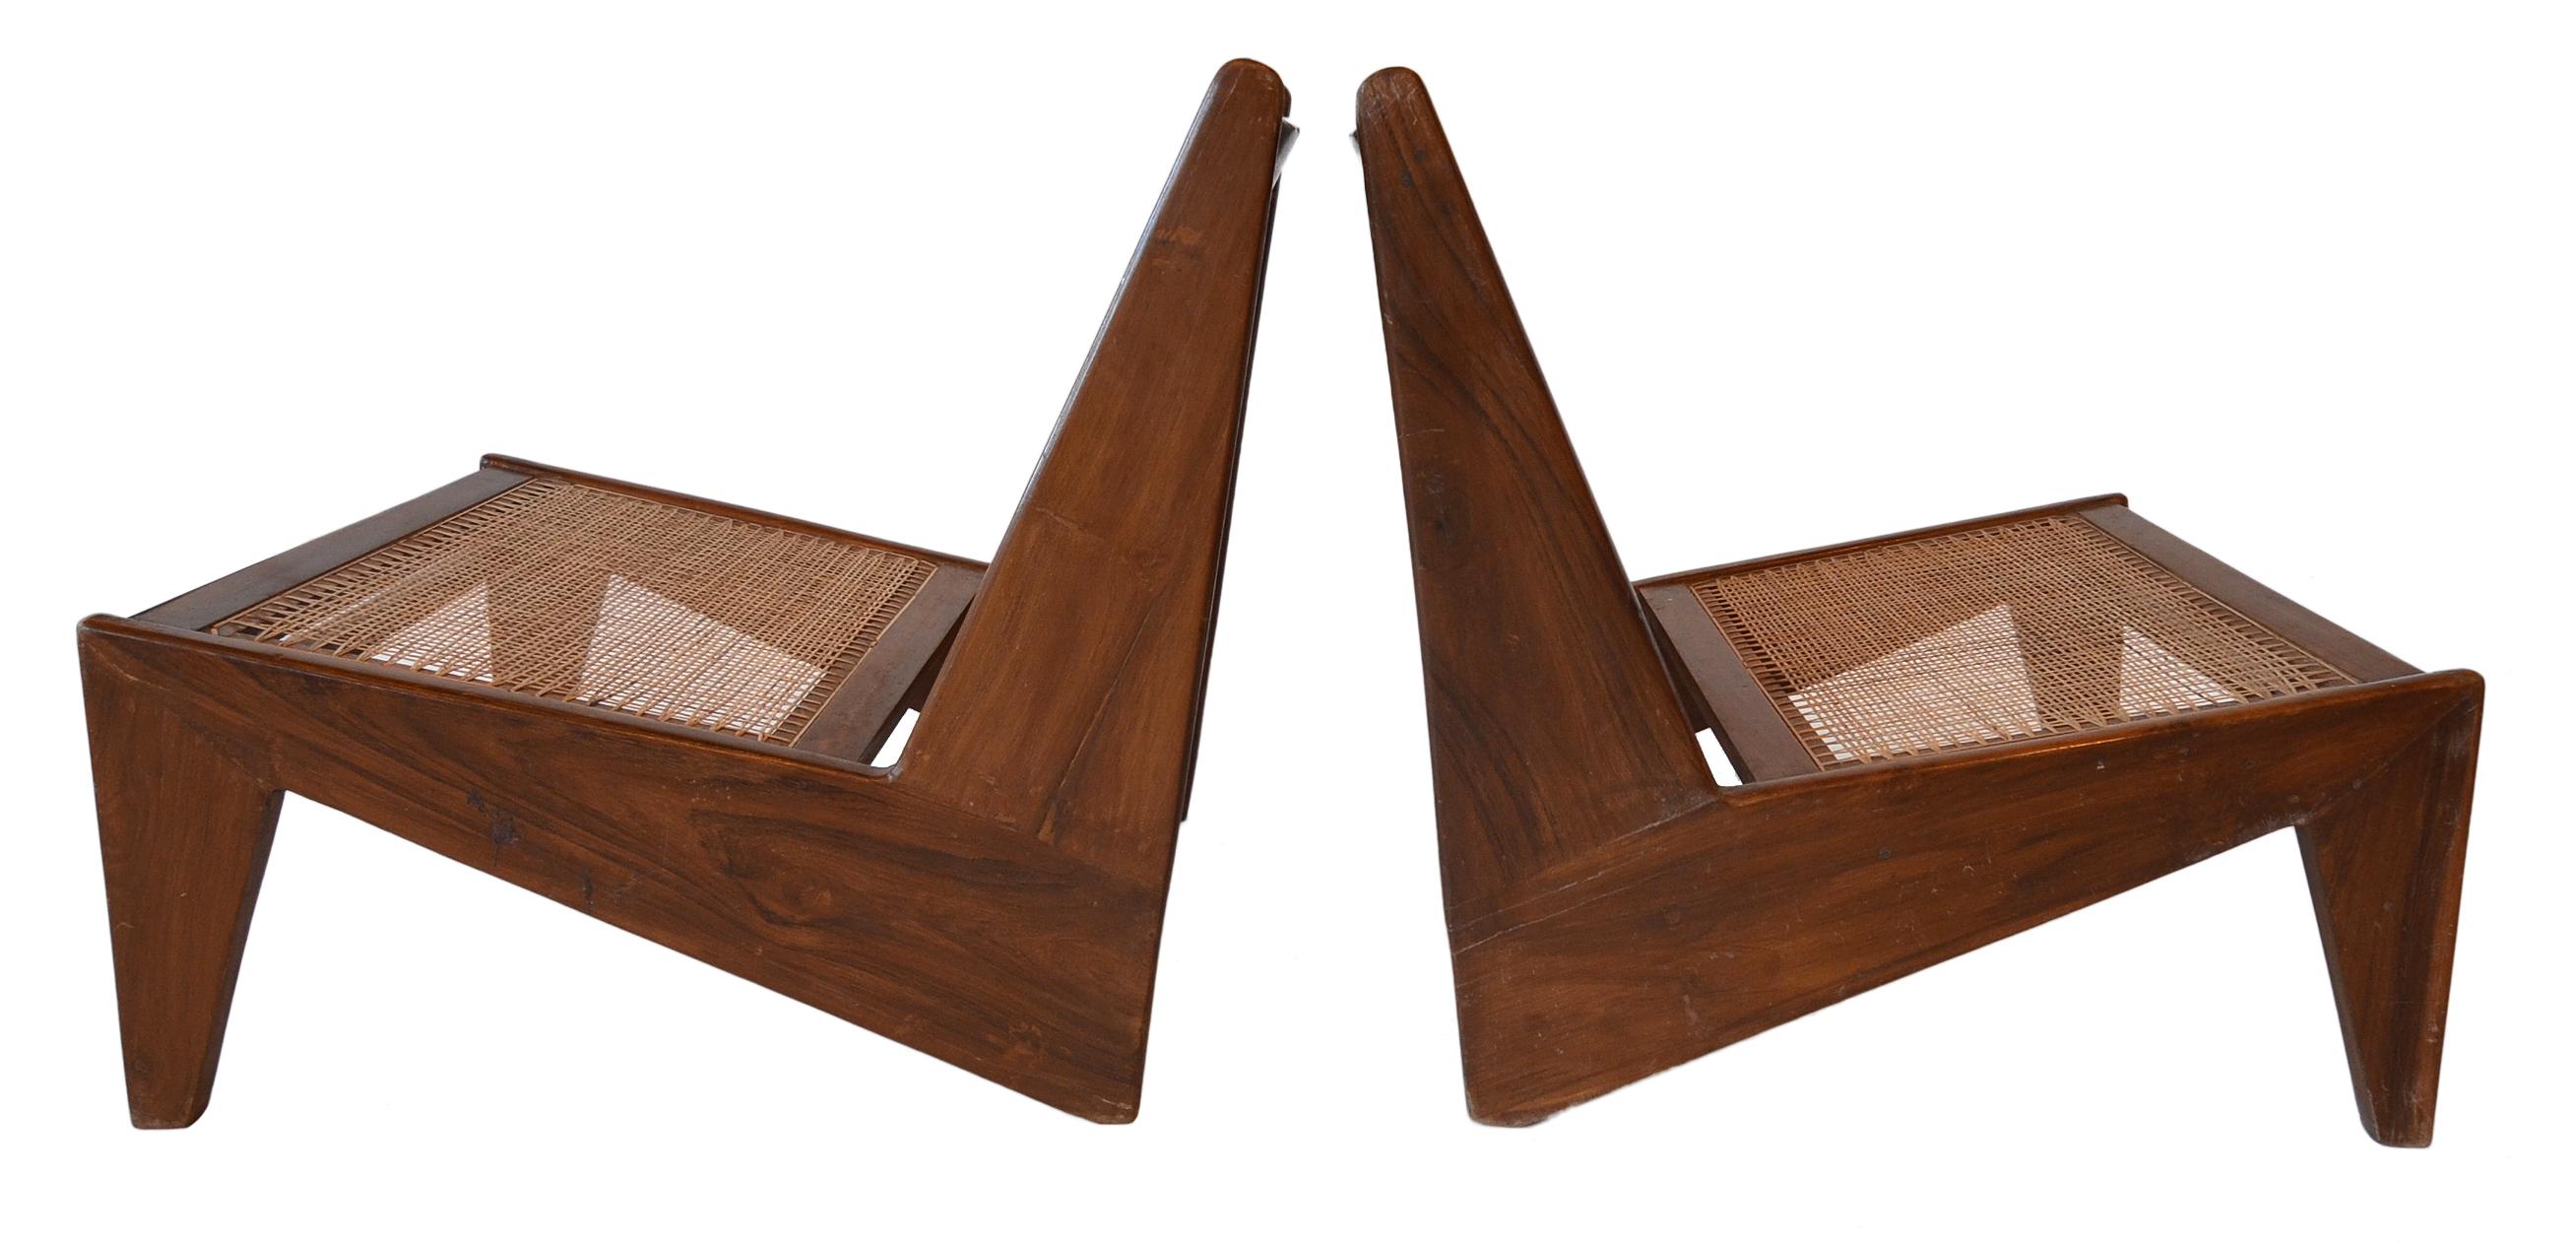 A beautiful pair of matching Kangaroo low chairs by Pierre Jeanneret for the Chandigarh Project. These examples are in exceptional condition. Solid teak wood and hand-built construction.